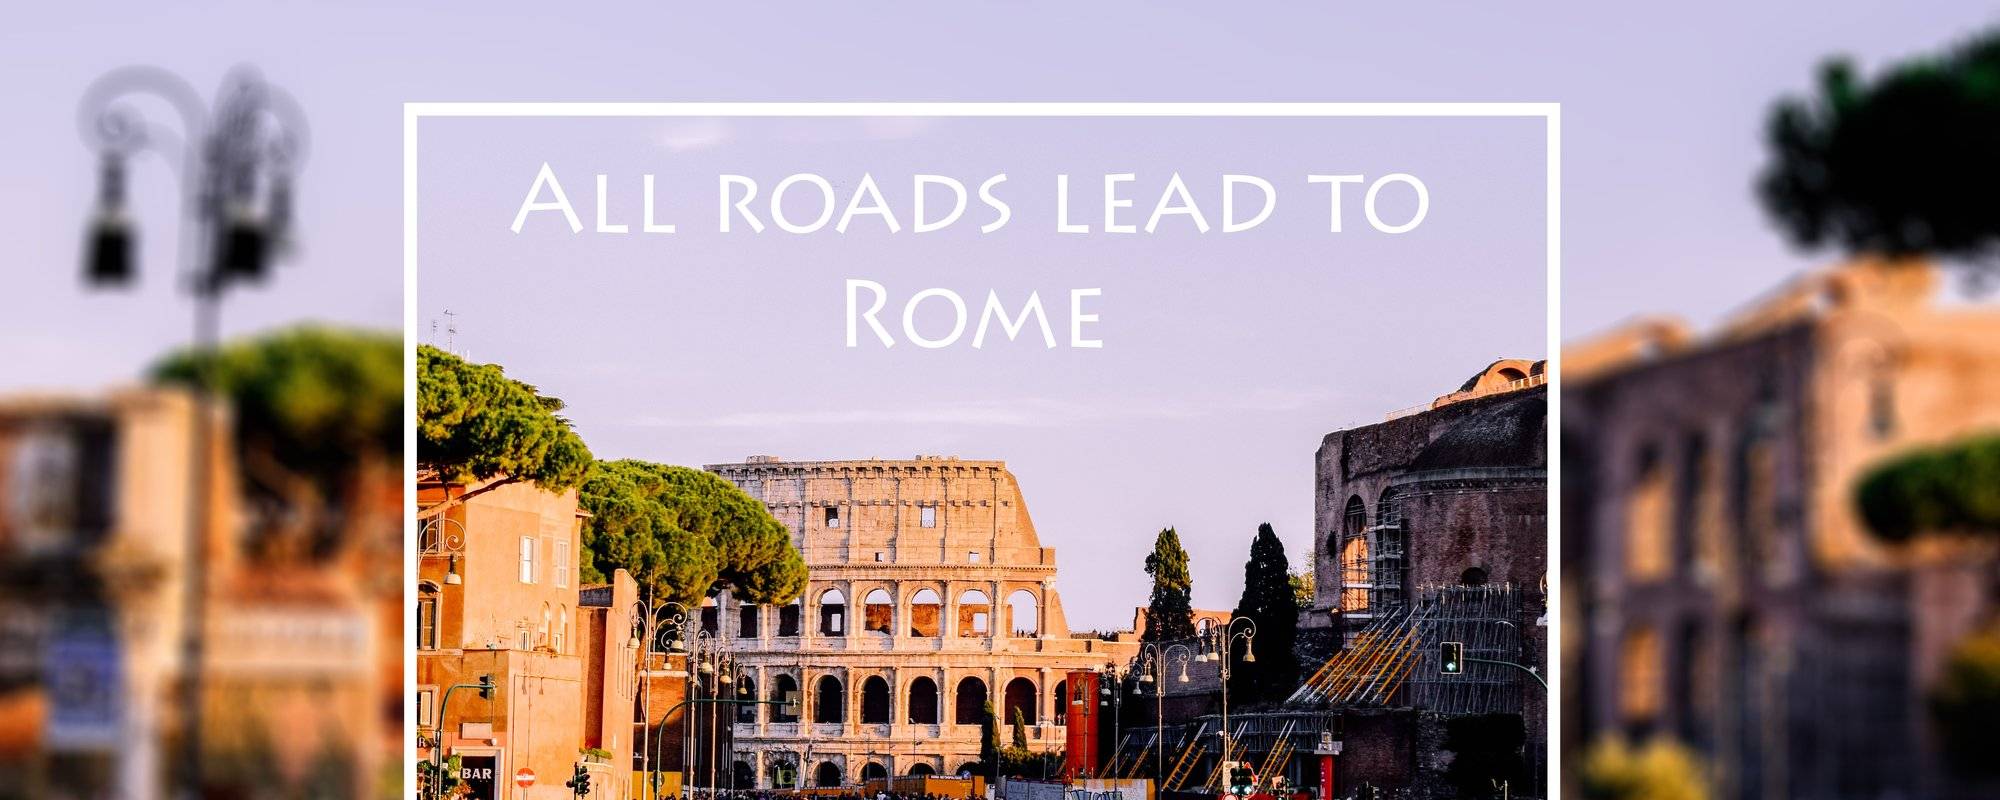 5 MANDATORY places to see in ROME